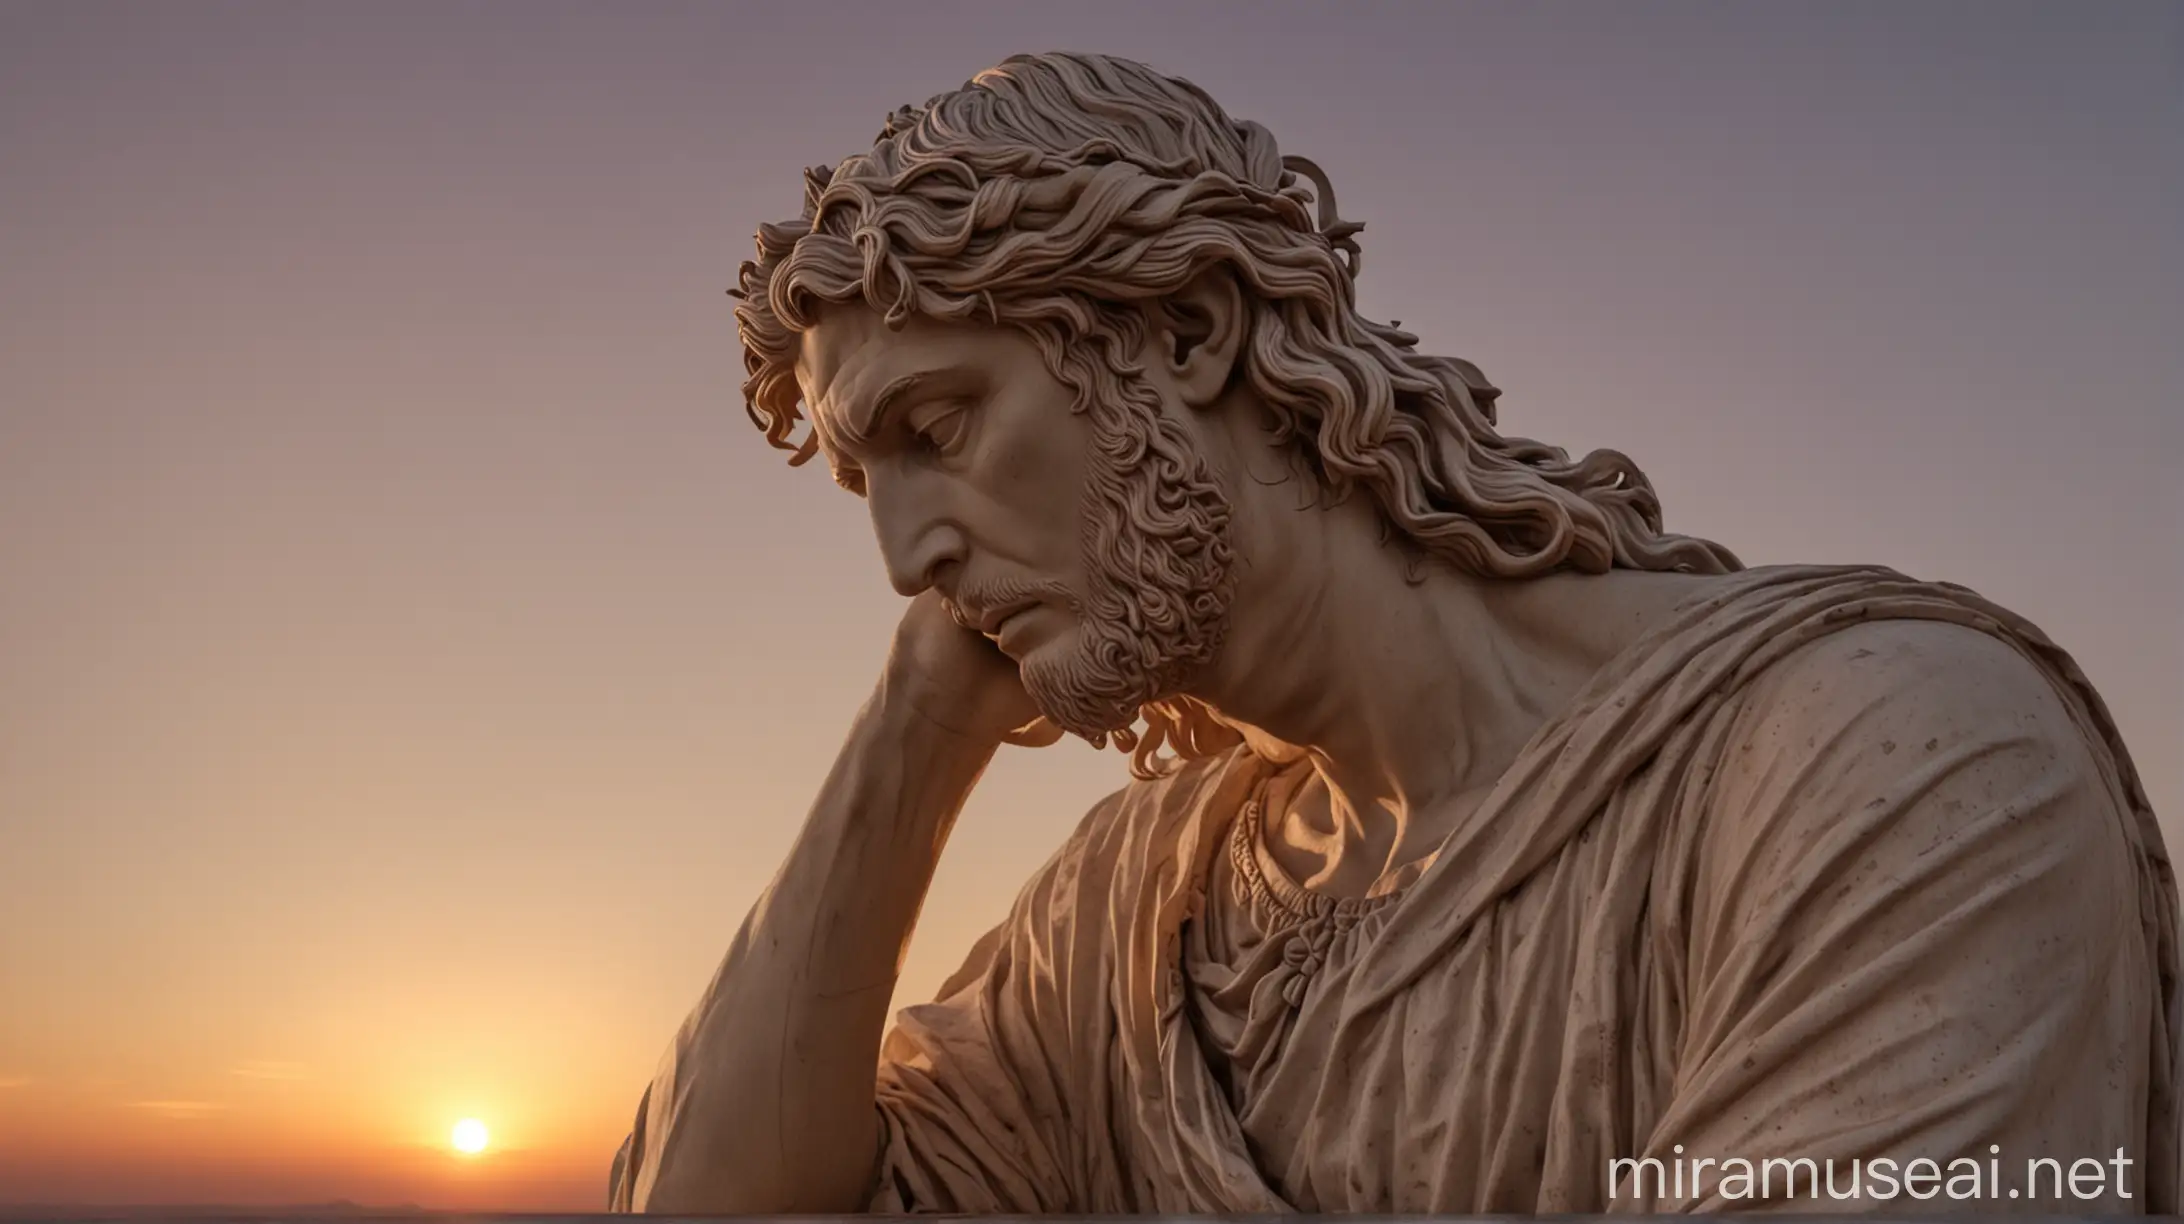 Stoic Male Statue at Sunset with Long Hair Looking Depressed